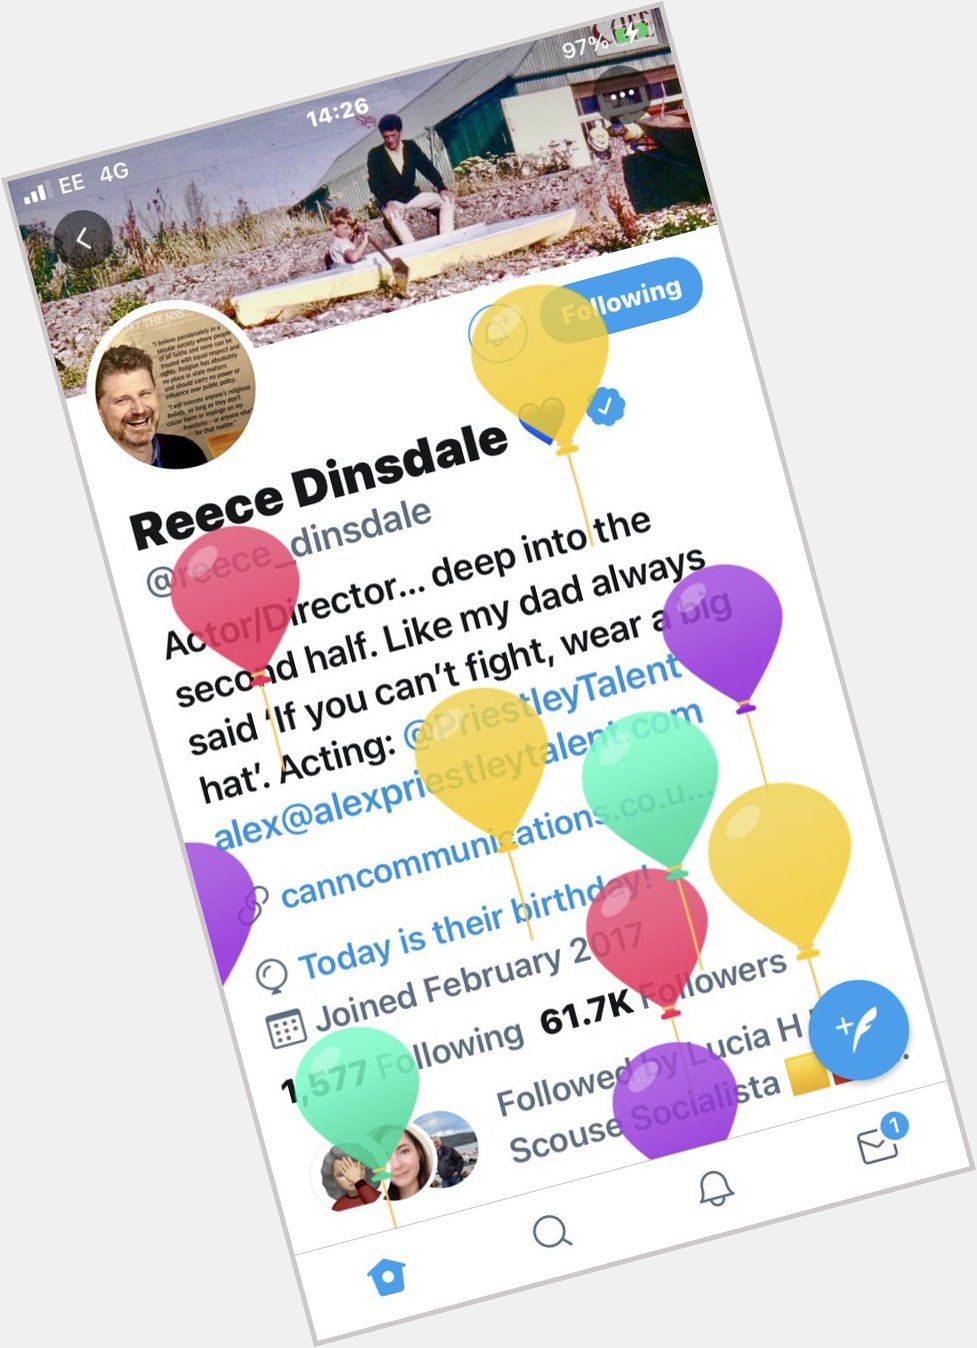  I get the balloons on your profile. Happy birthday 